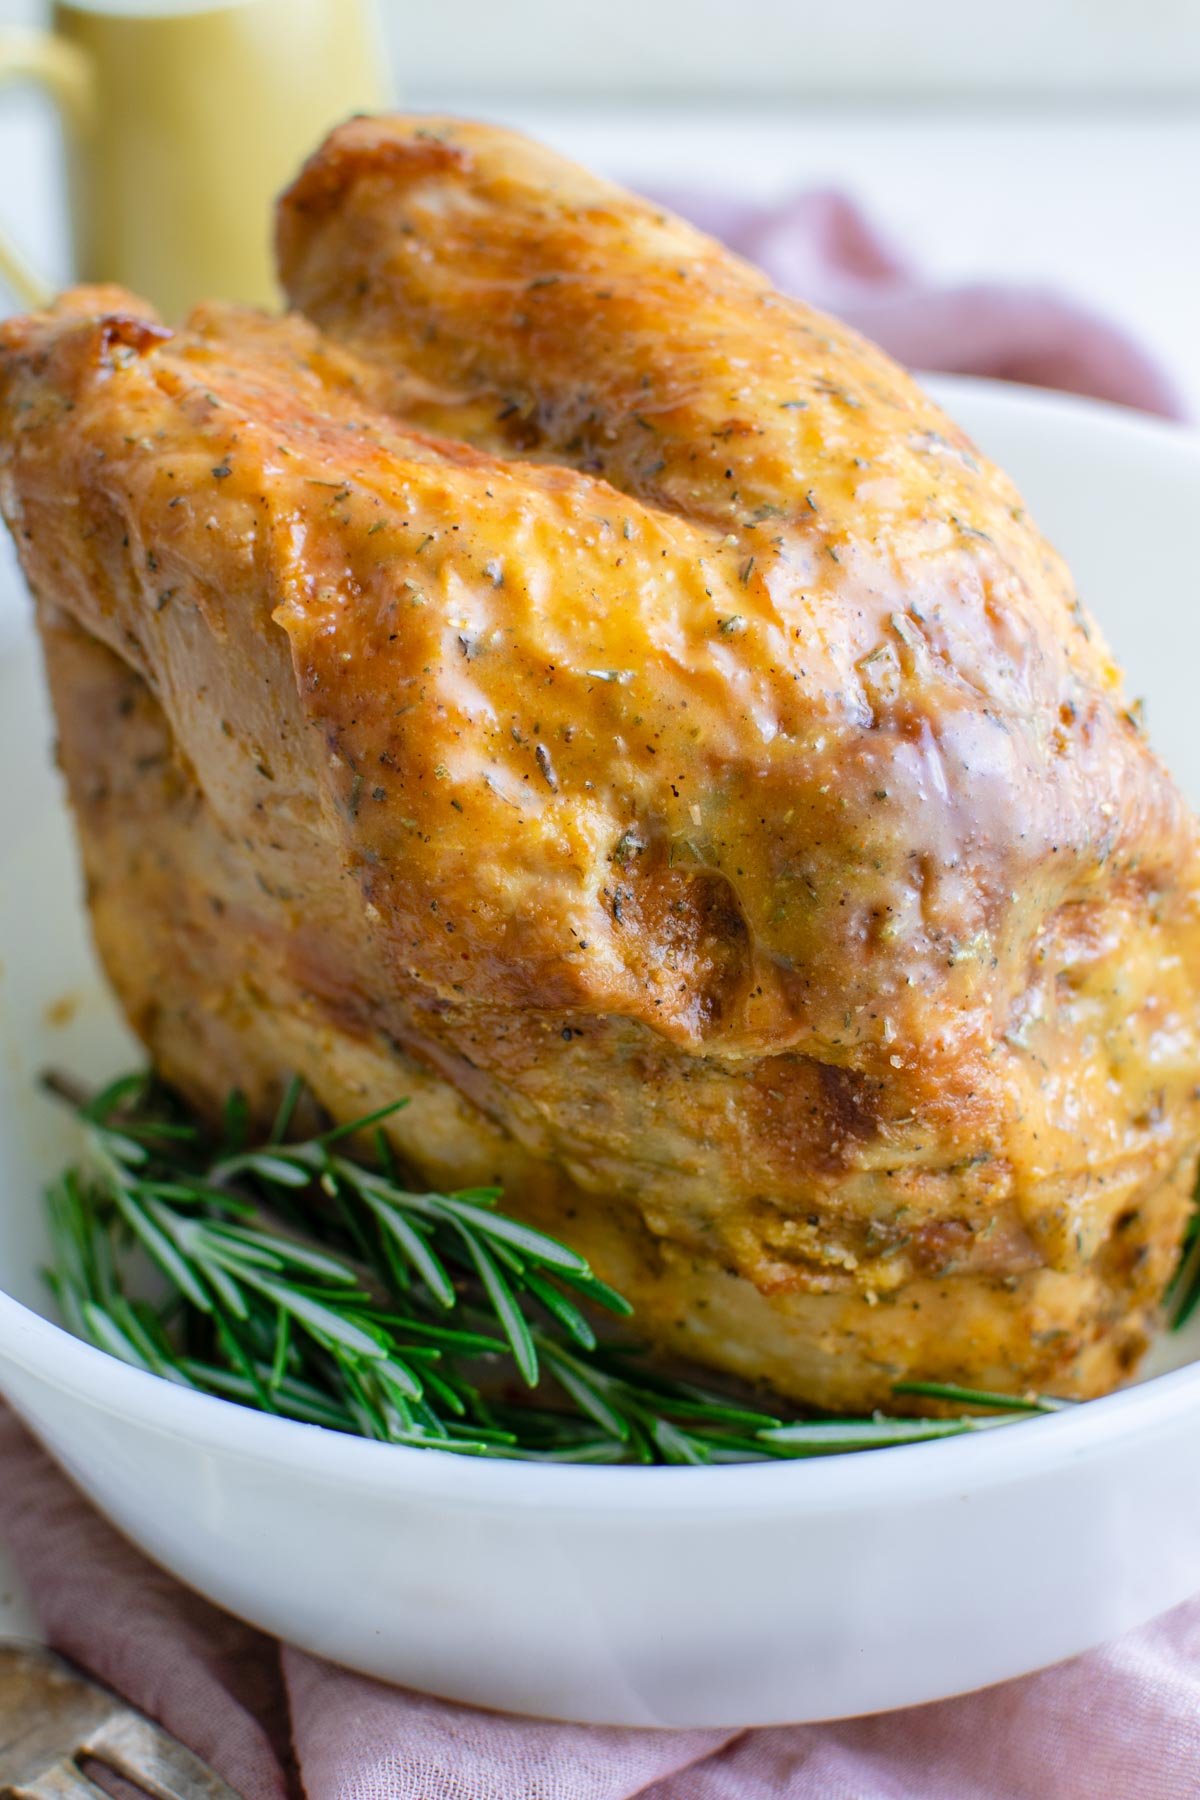 a whole turkey breast with crispy skin, a white dish, green leaves